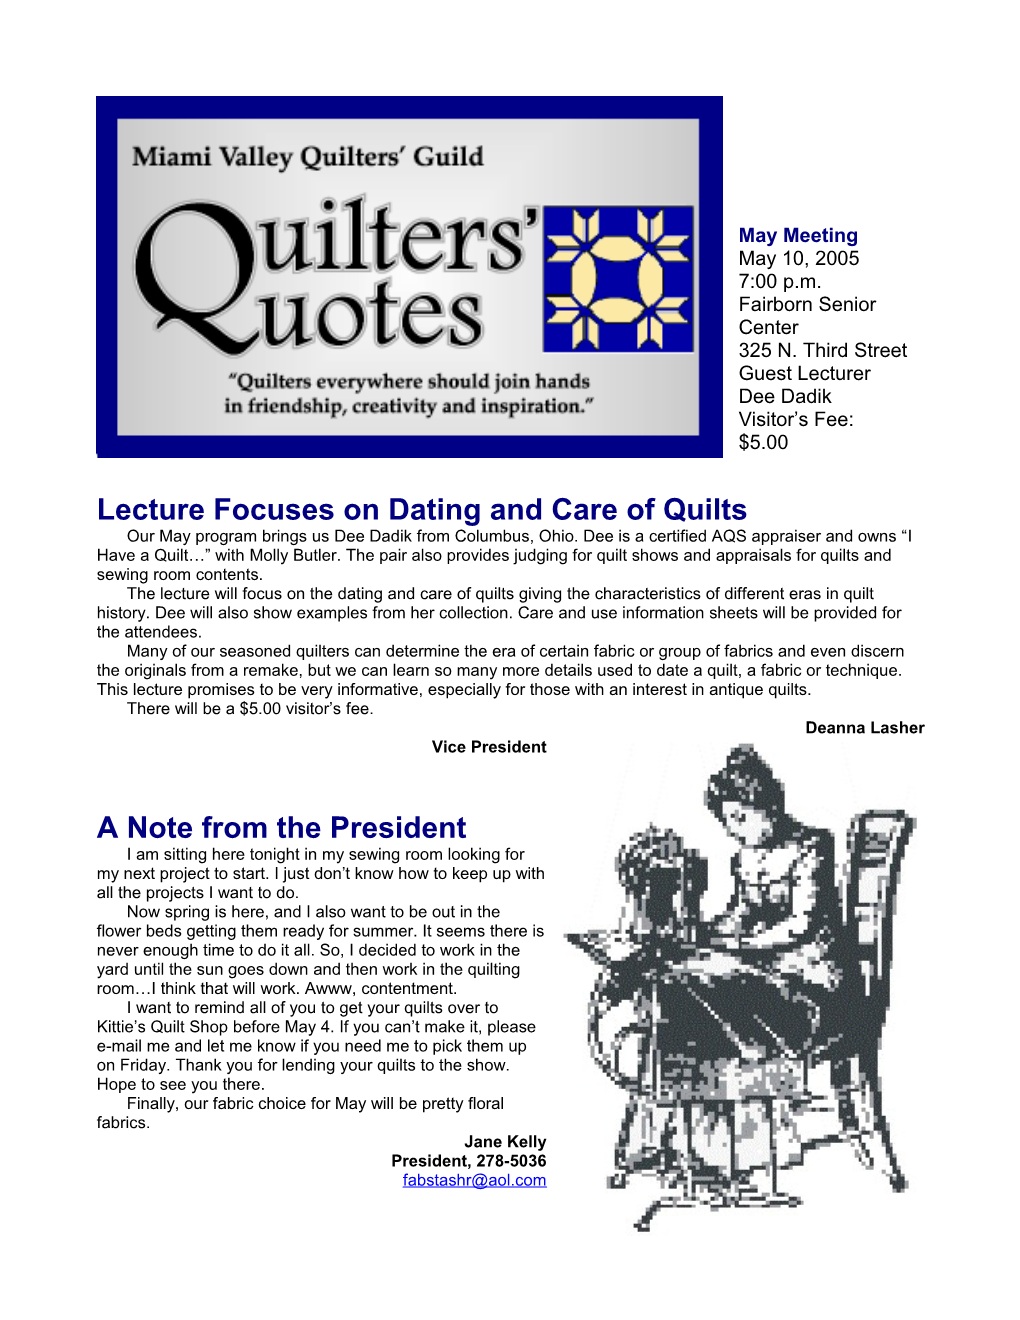 Lecture Focuses on Dating and Care of Quilts